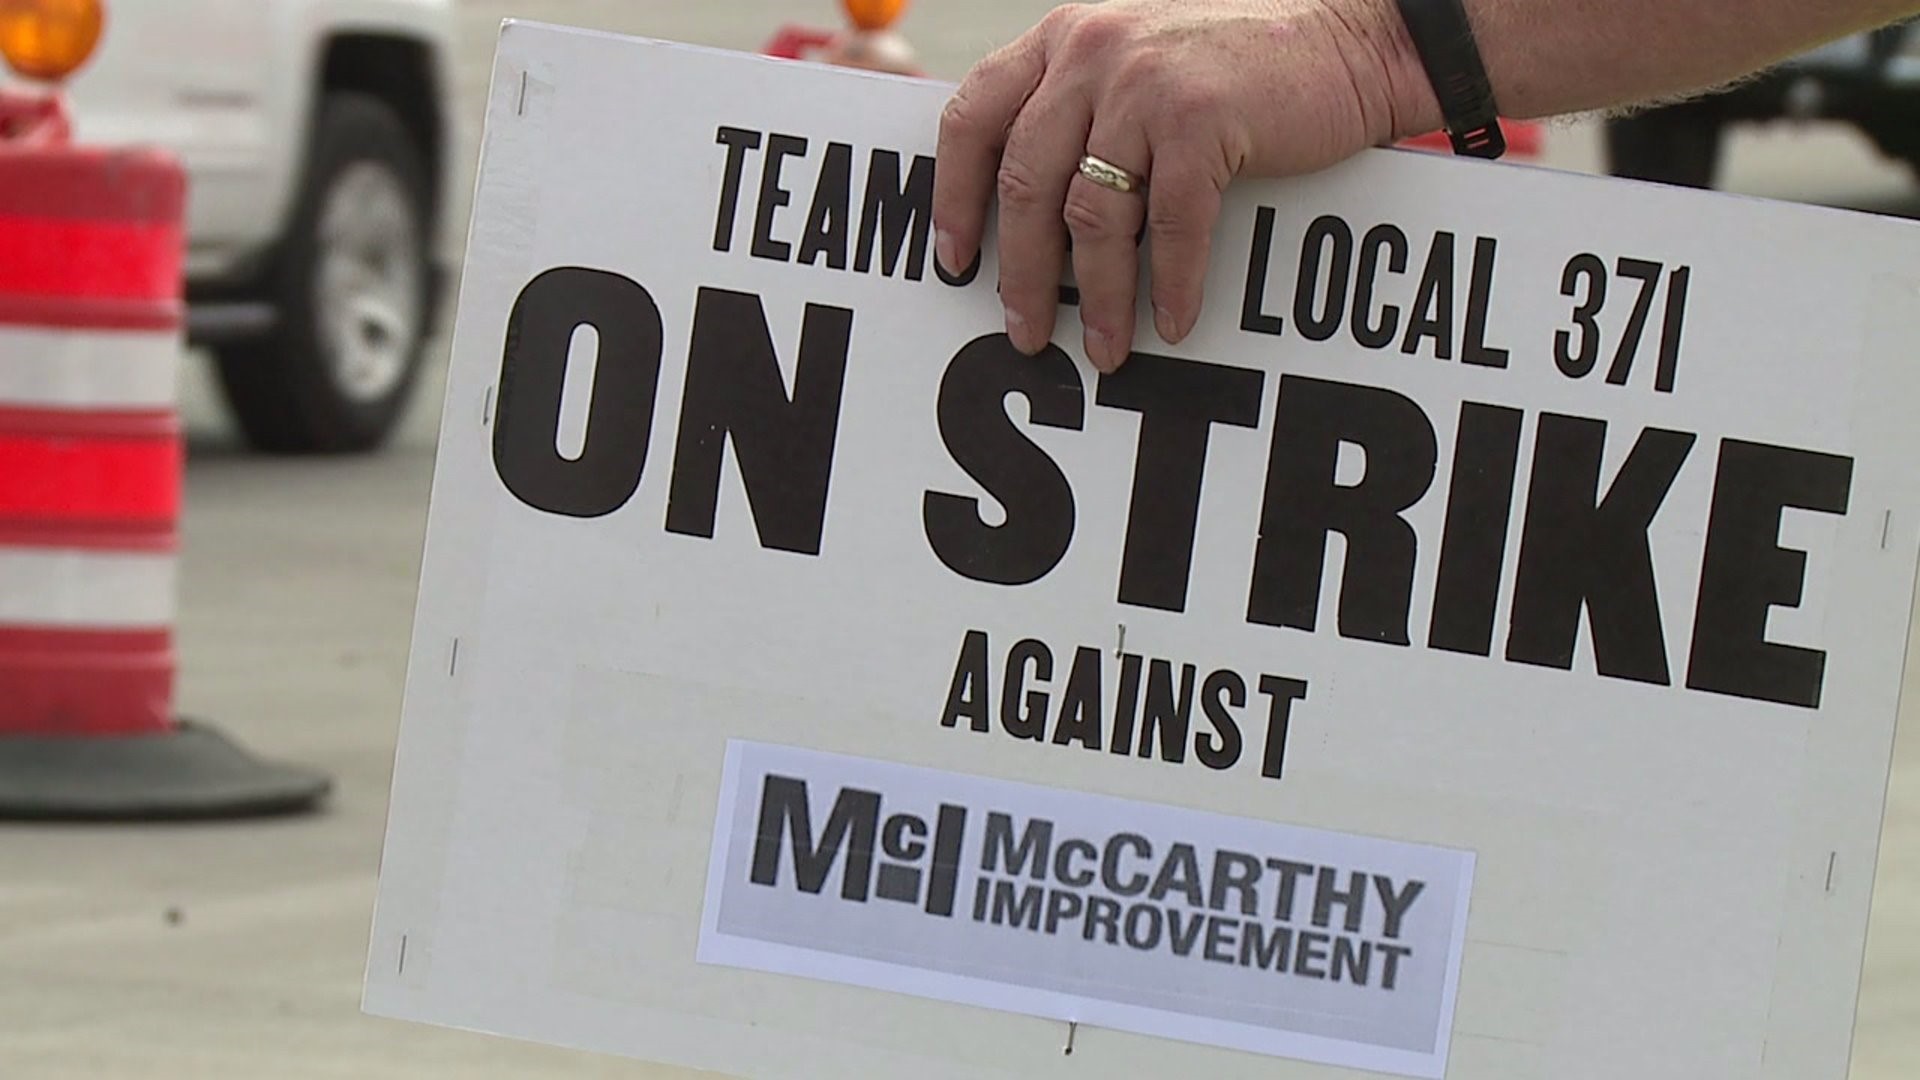 Local Union workers on strike